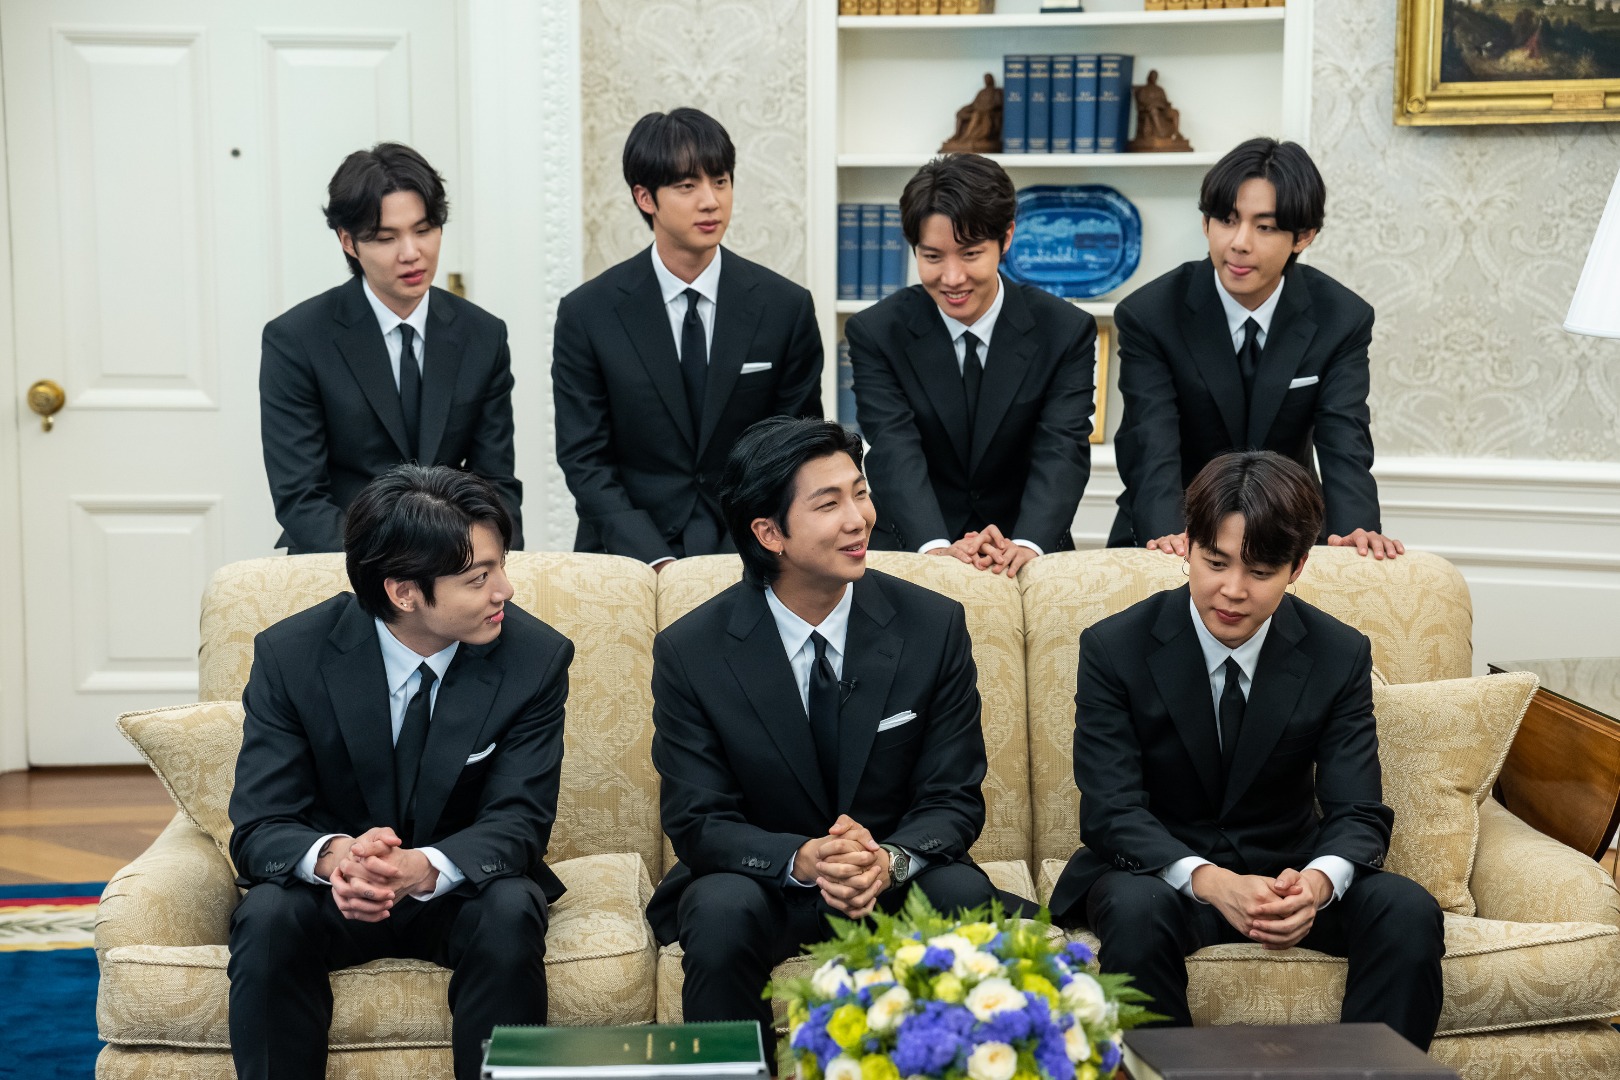 BTS at The White House